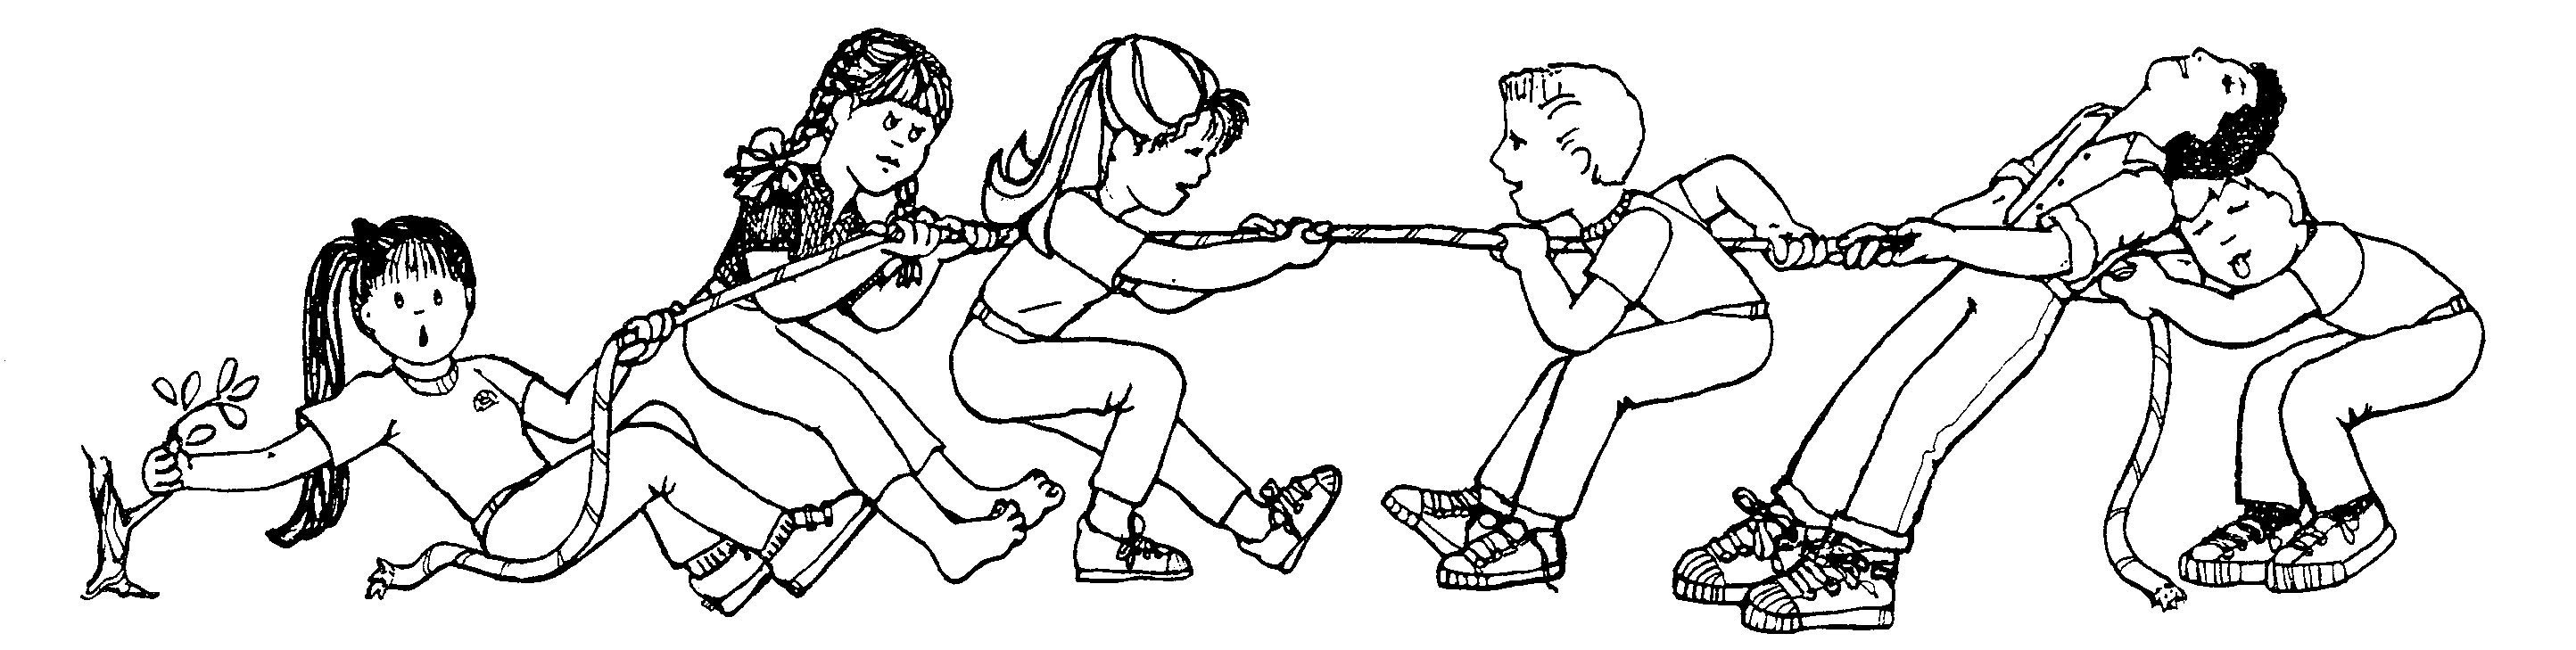 tug of war clipart images - photo #35